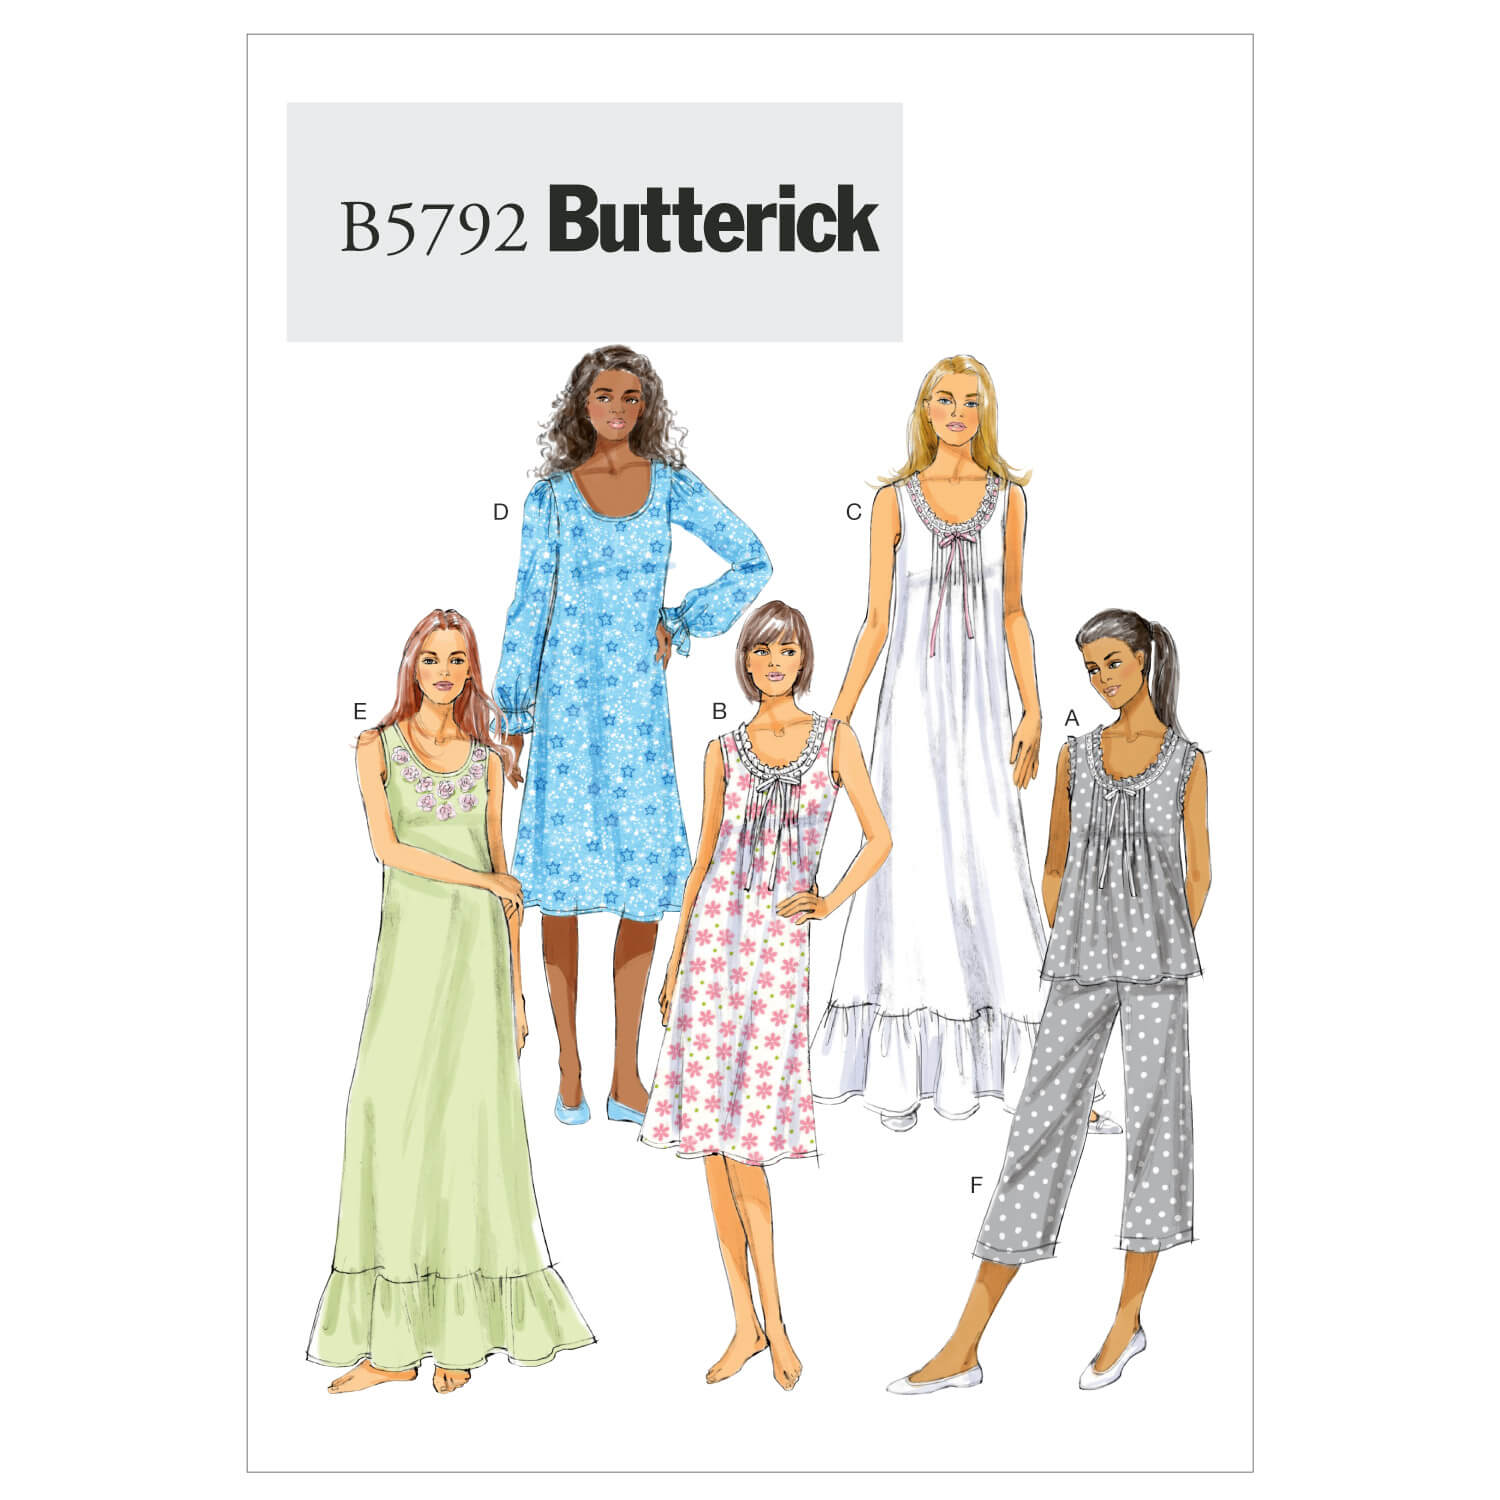 Butterick Sewing Pattern B5792 Misses' Top, Gown and Pants